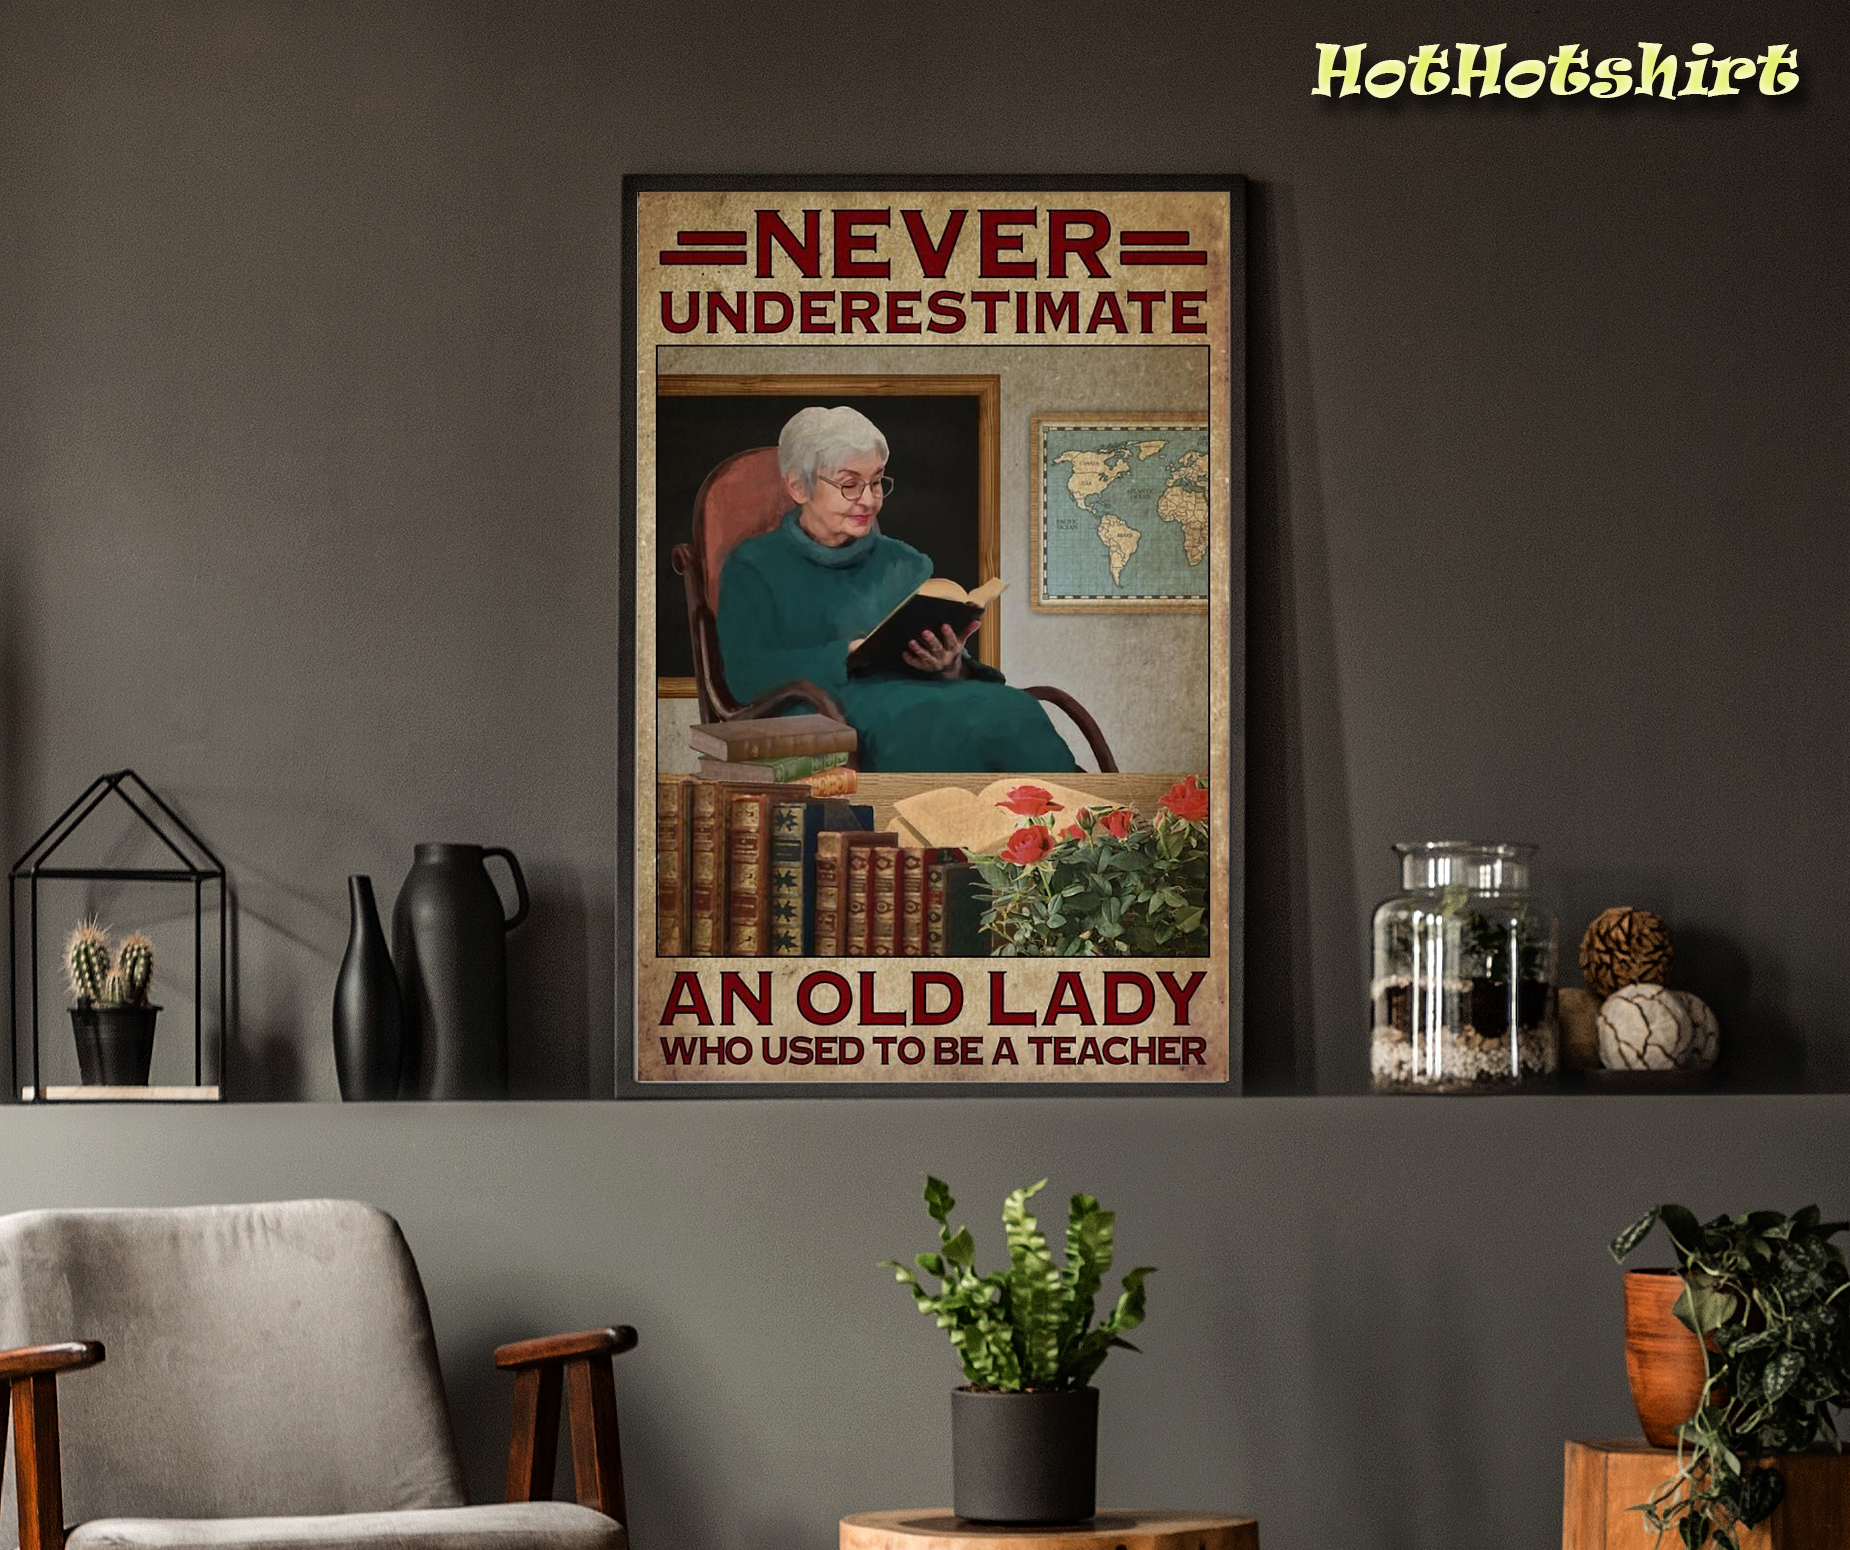 Never underestimate an old lady who used to be a teacher poster